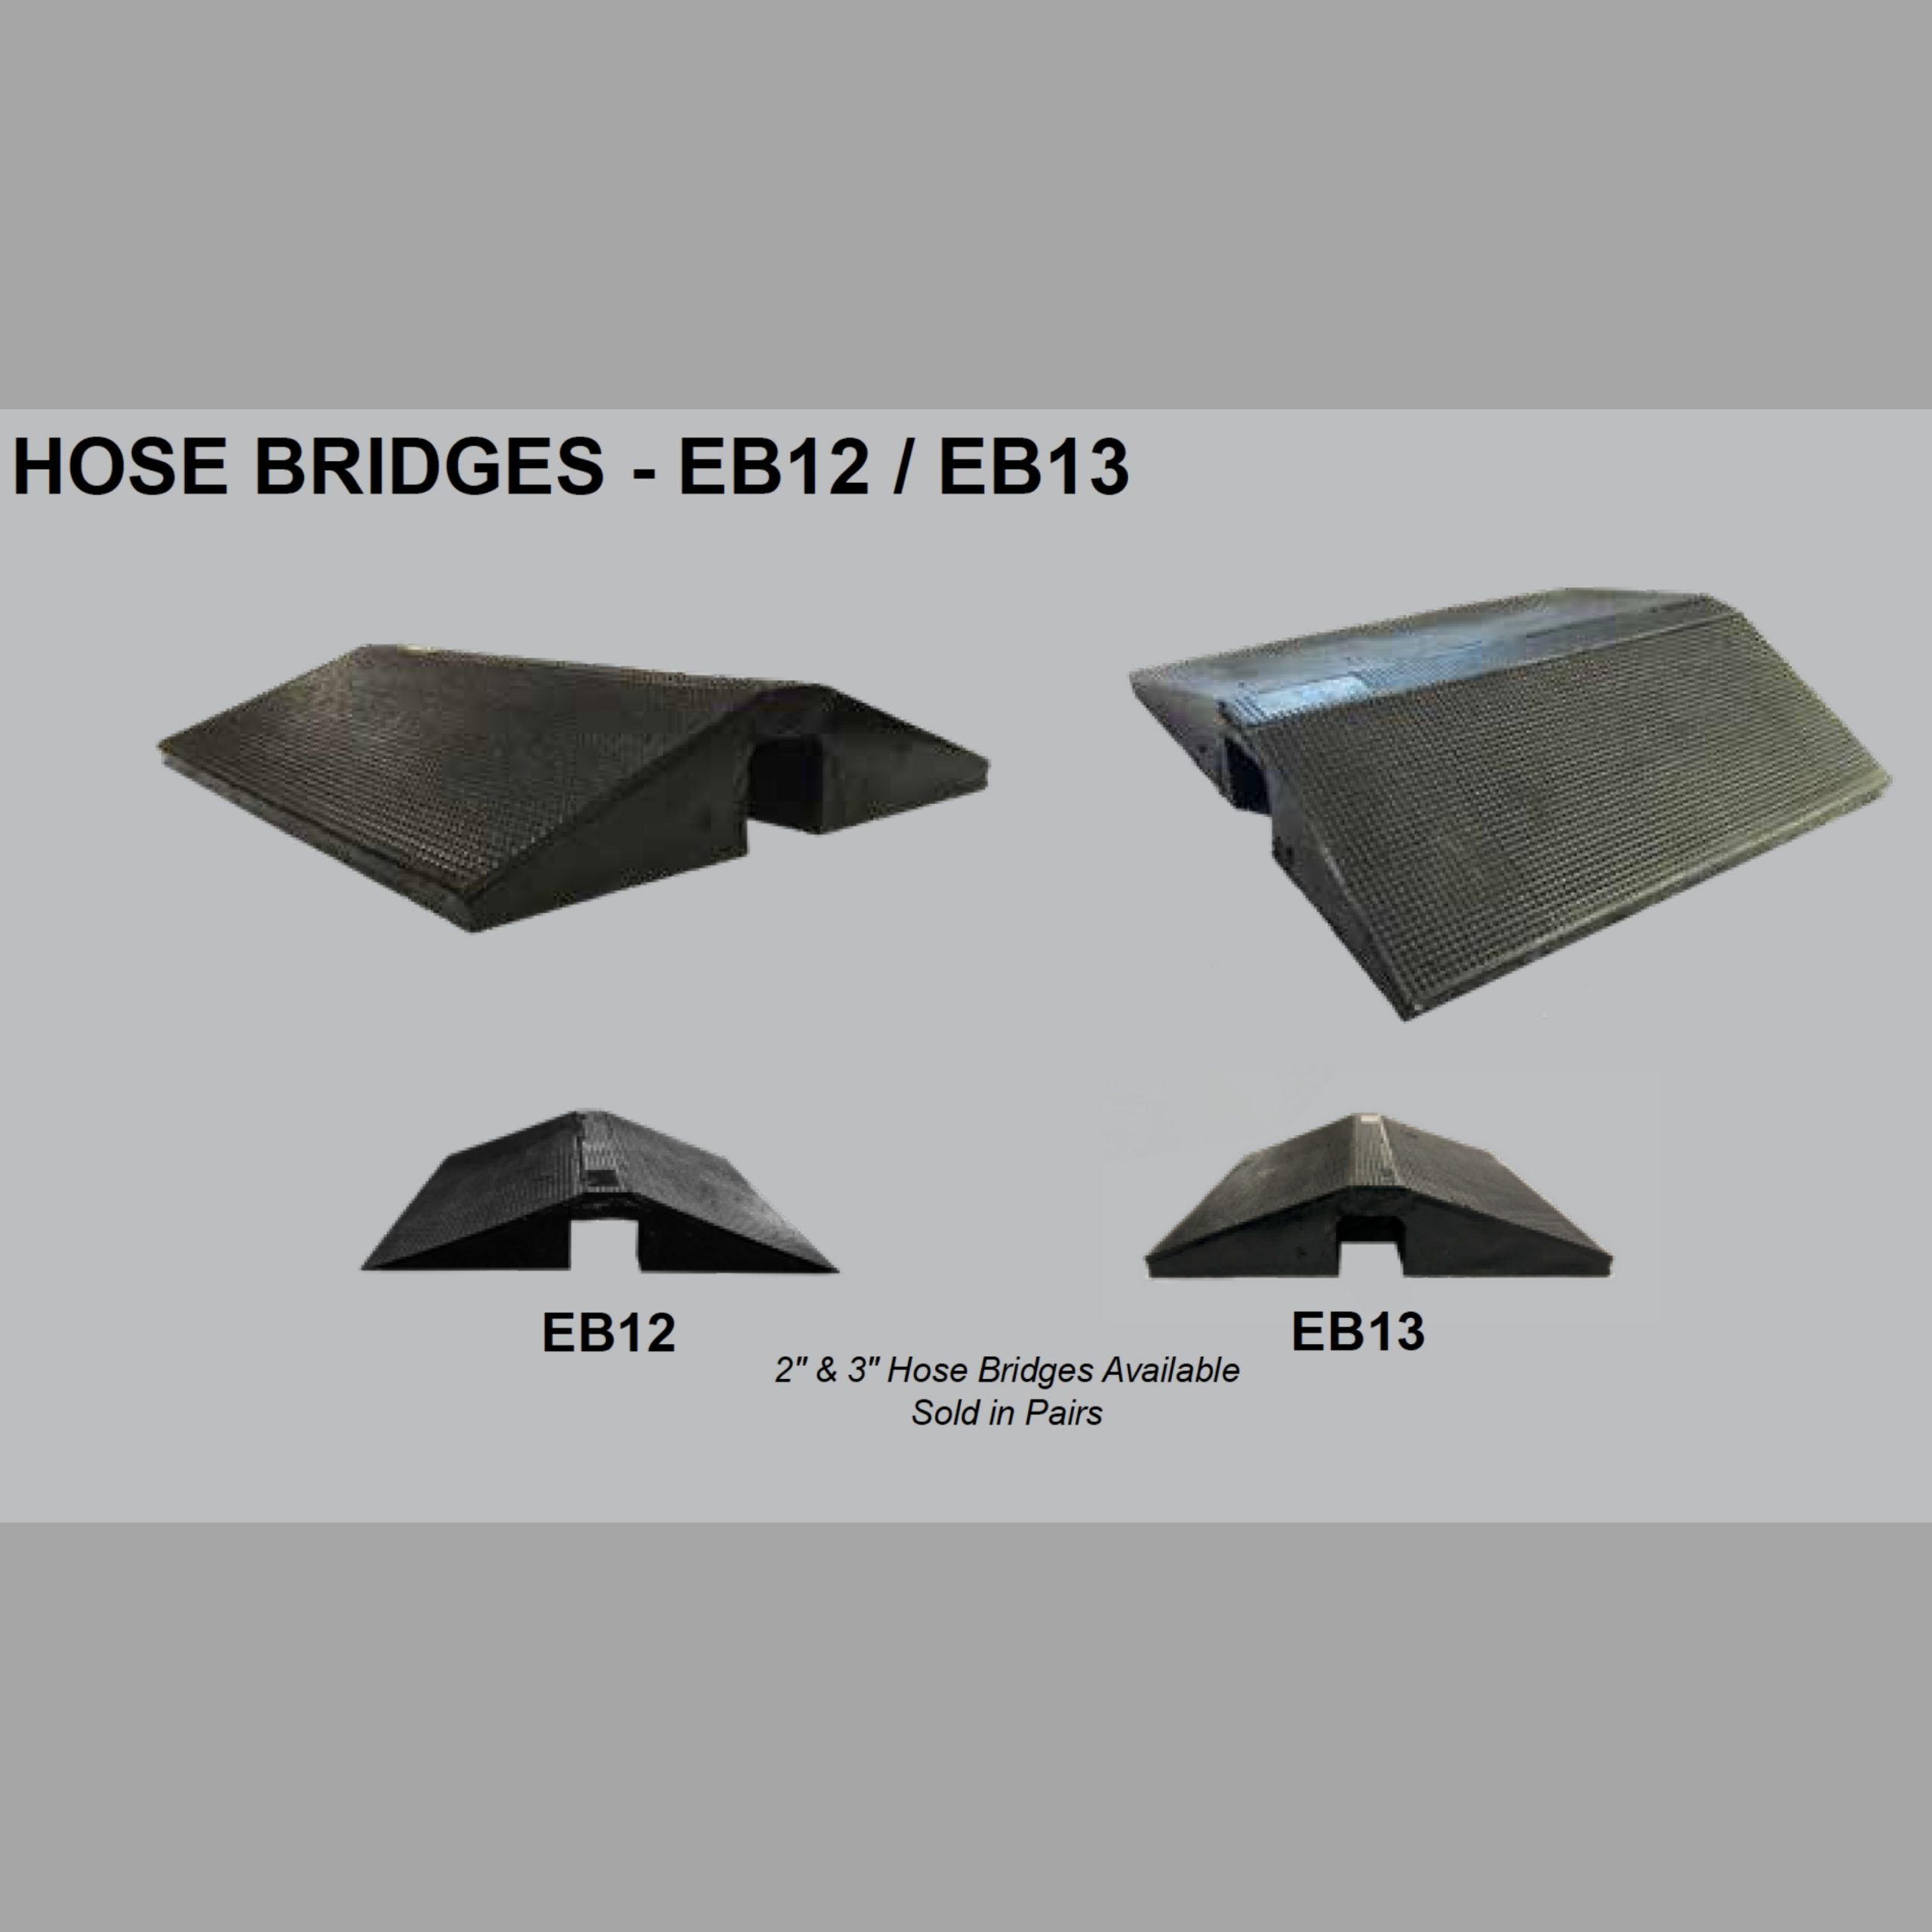 https://www.cableprotectorworks.com/wp-content/uploads/2021/04/Elasco-Products-Hose-Bridge-Cable-Cover-EB13-4-scaled.jpg